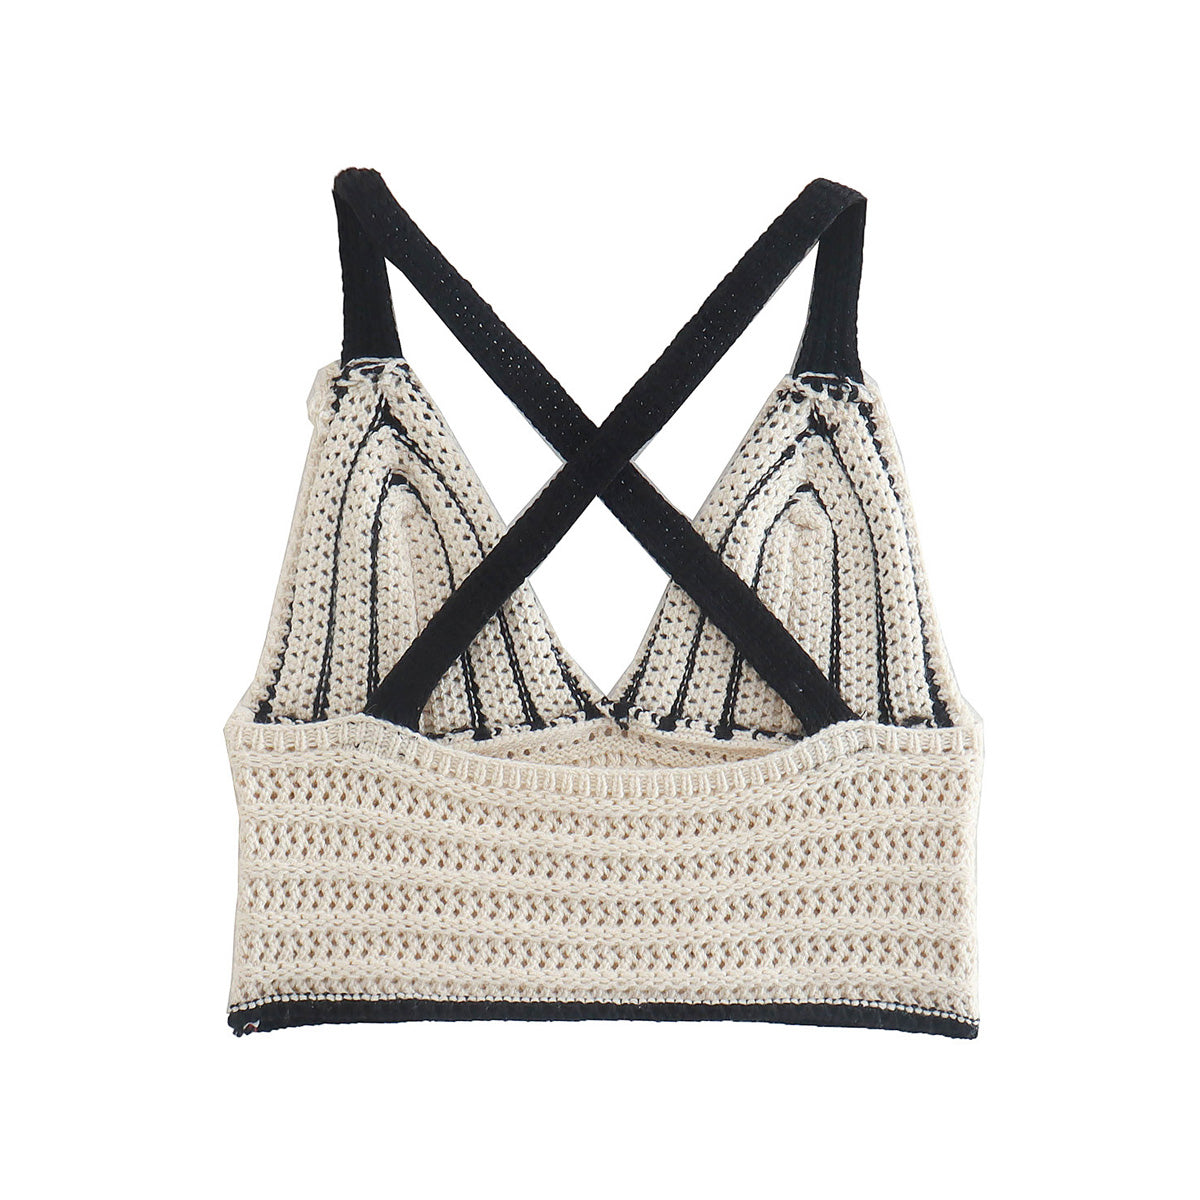 The Nassau Knitted Crochet Cropped Halter Top